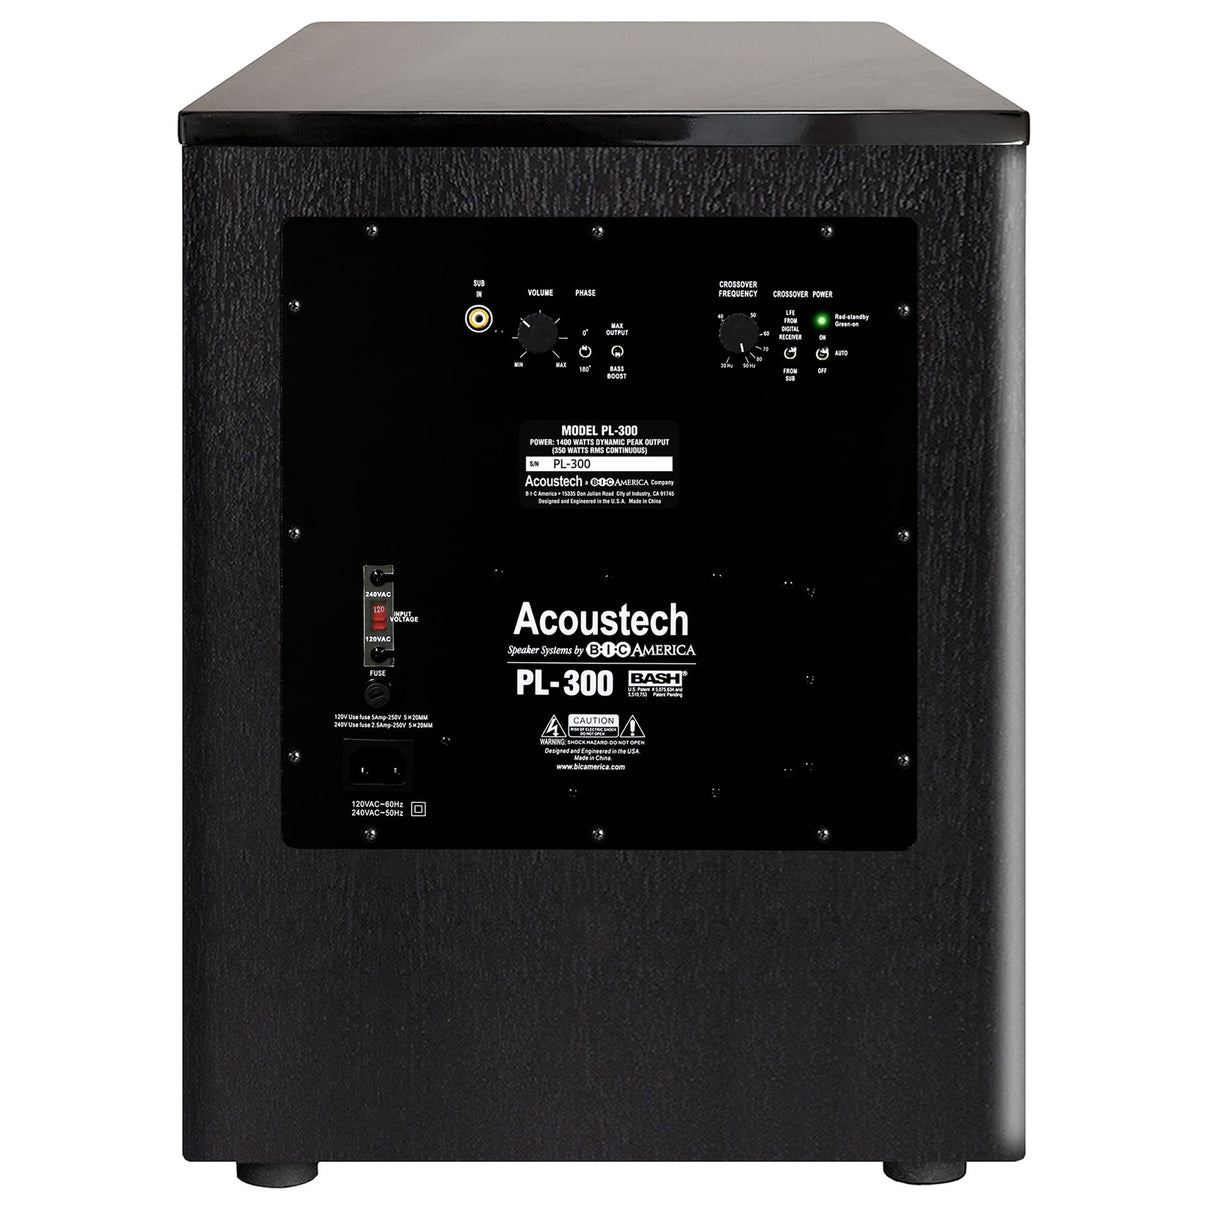 BIC America Acoustech  PL-300 – 1400W 12” Powered Subwoofer